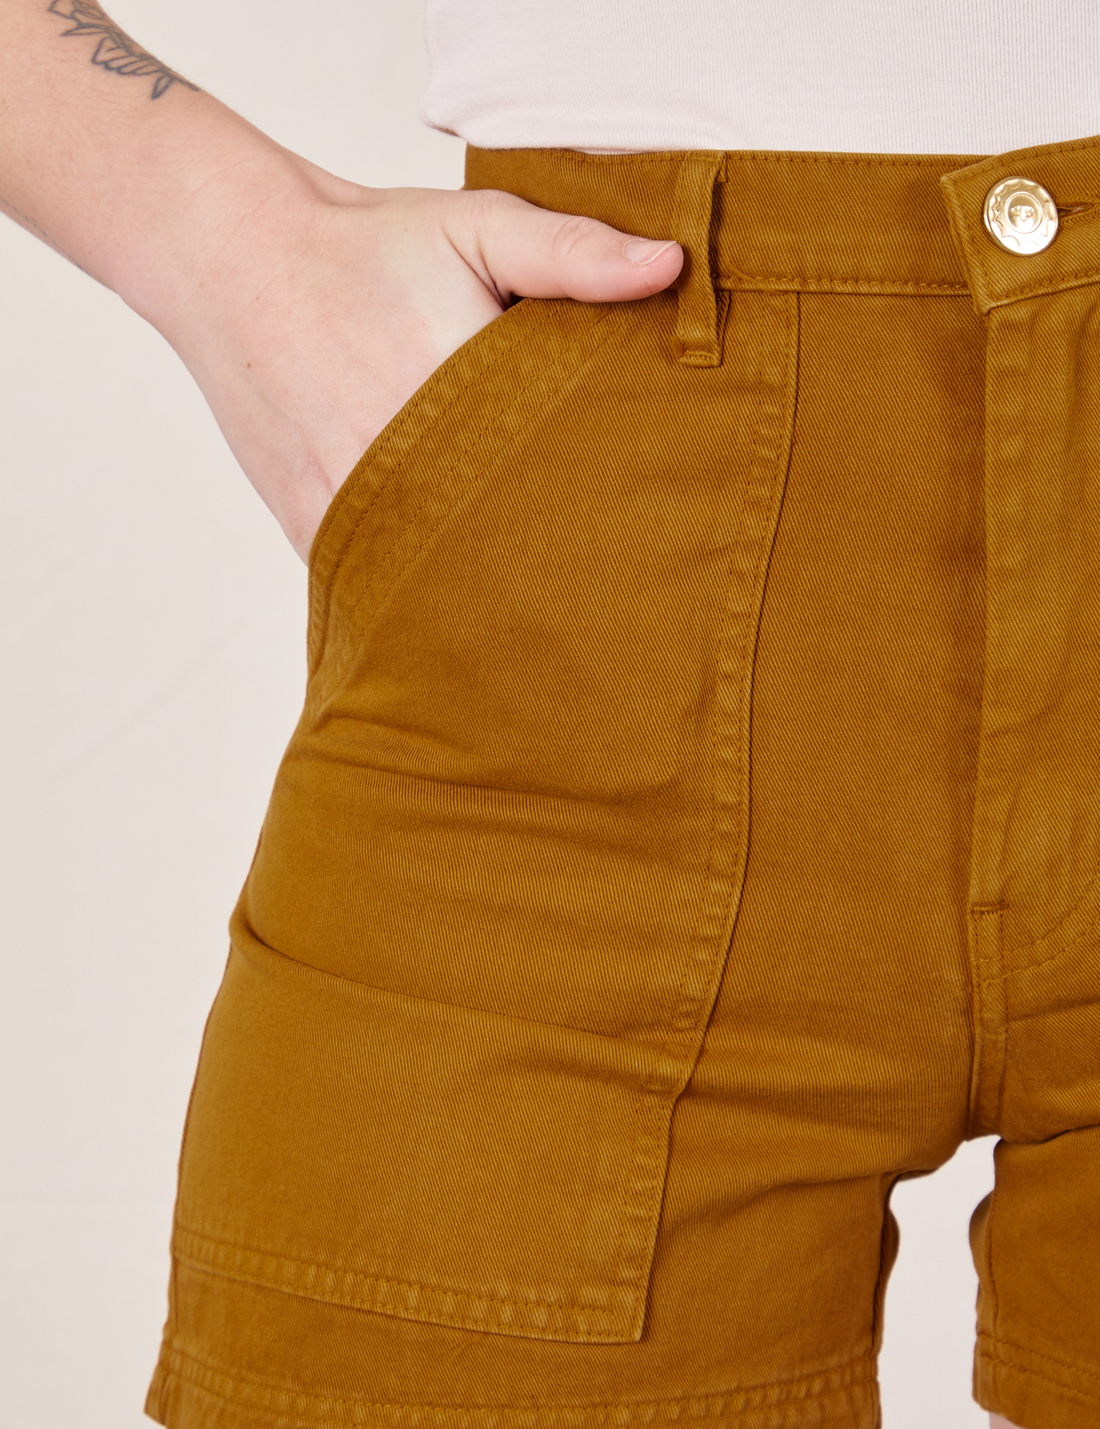 Classic Work Shorts in Spicy Mustard front close up. Alex has her hand in the pocket.